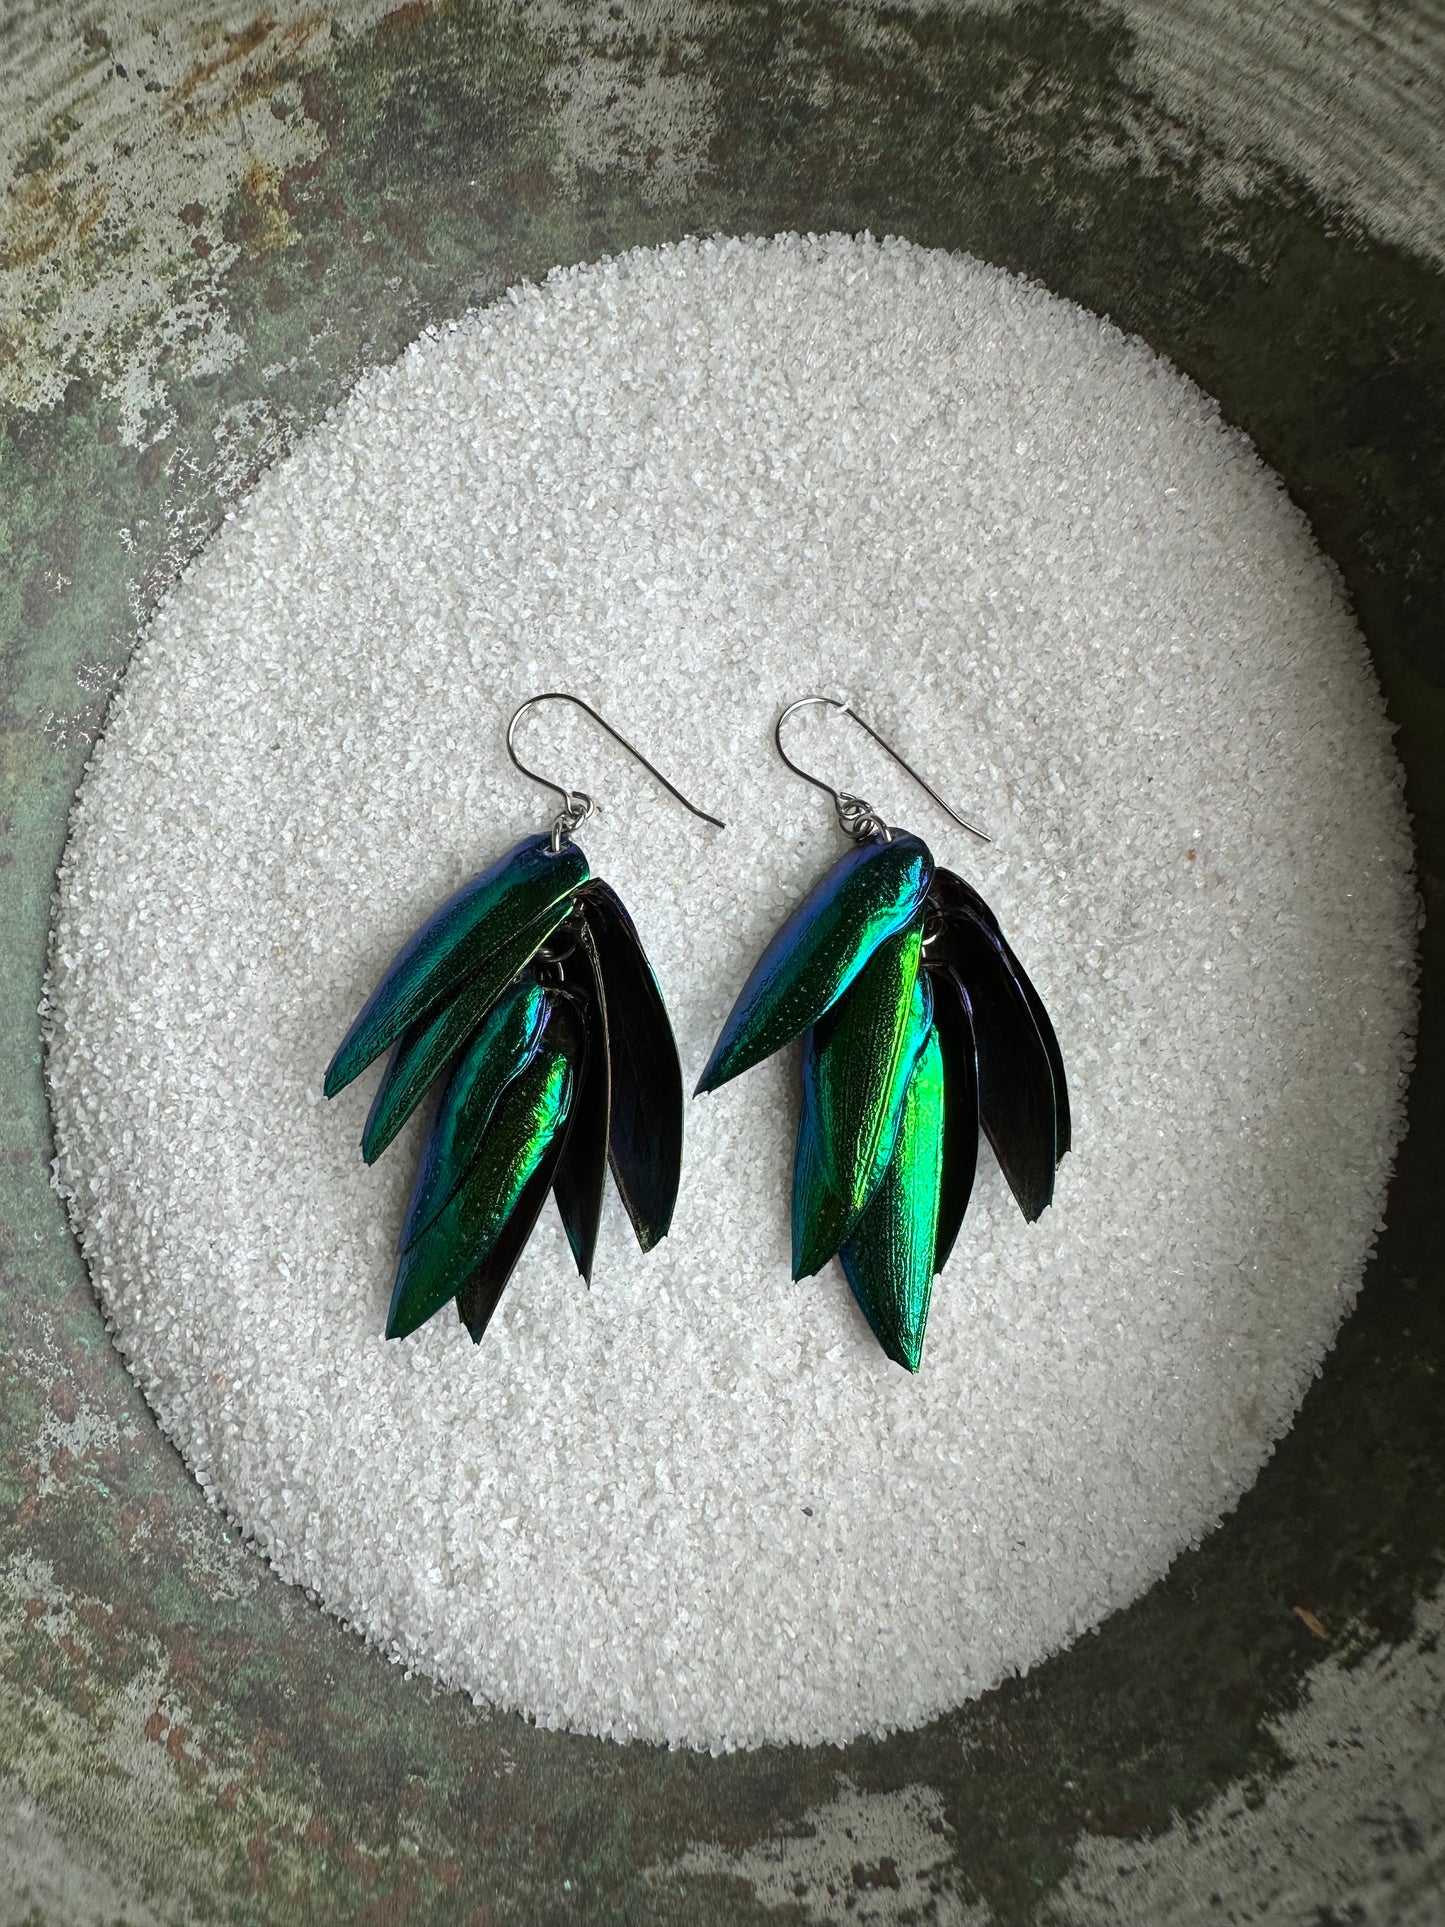 Bundle of Real Wing Earrings made from Elytra Beetles with Surgical Steel